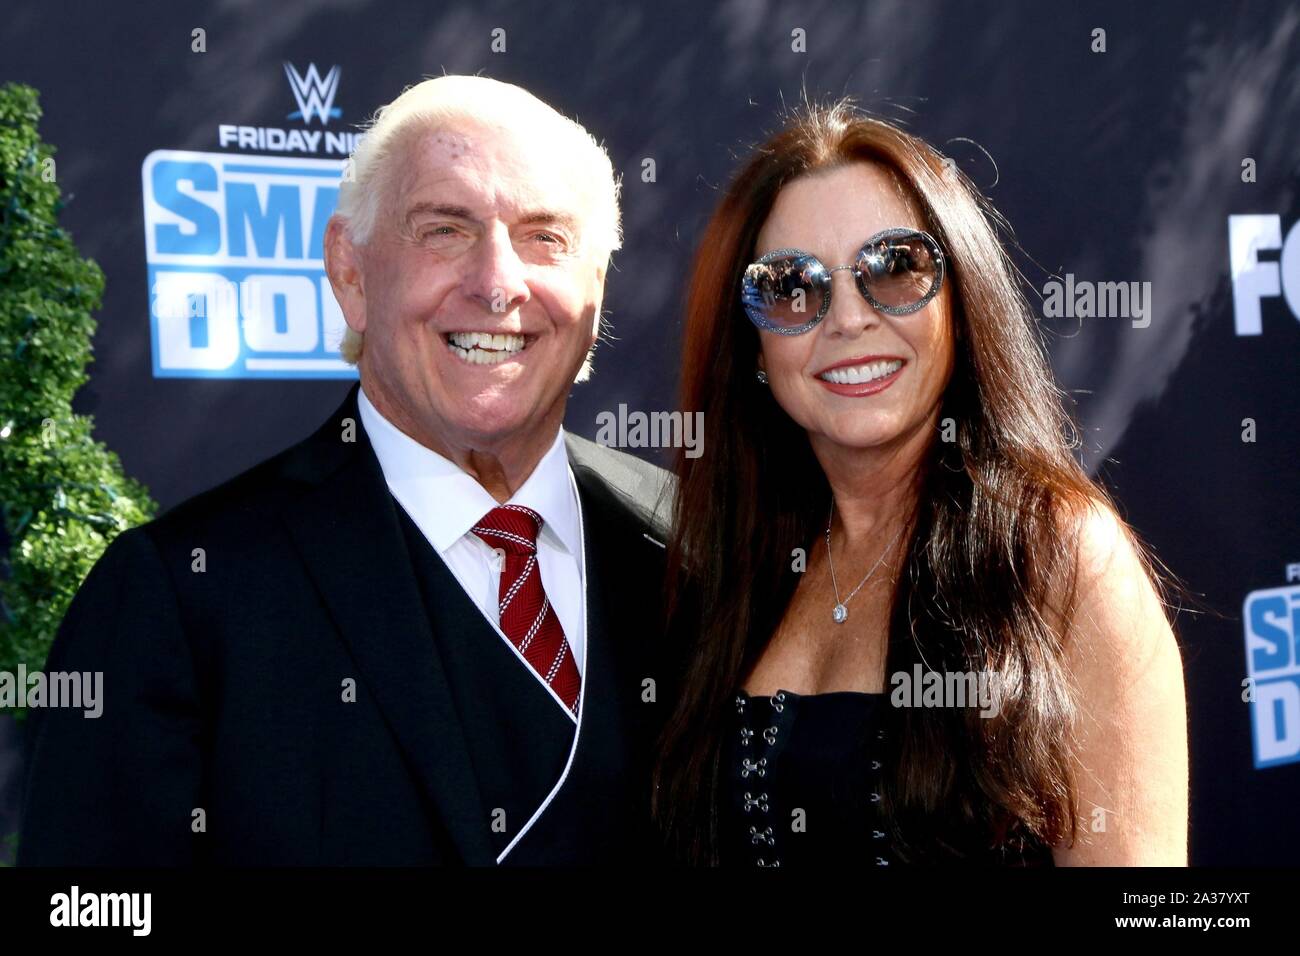 Ric Flair aka Richard Morgan Fliehr, guest at arrivals for WWE 20th Anniversary Celebration SmackDown Premiere, STAPLES Center, Los Angeles, CA October 4, 2019. Photo By: Priscilla Grant/Everett Collection Stock Photo